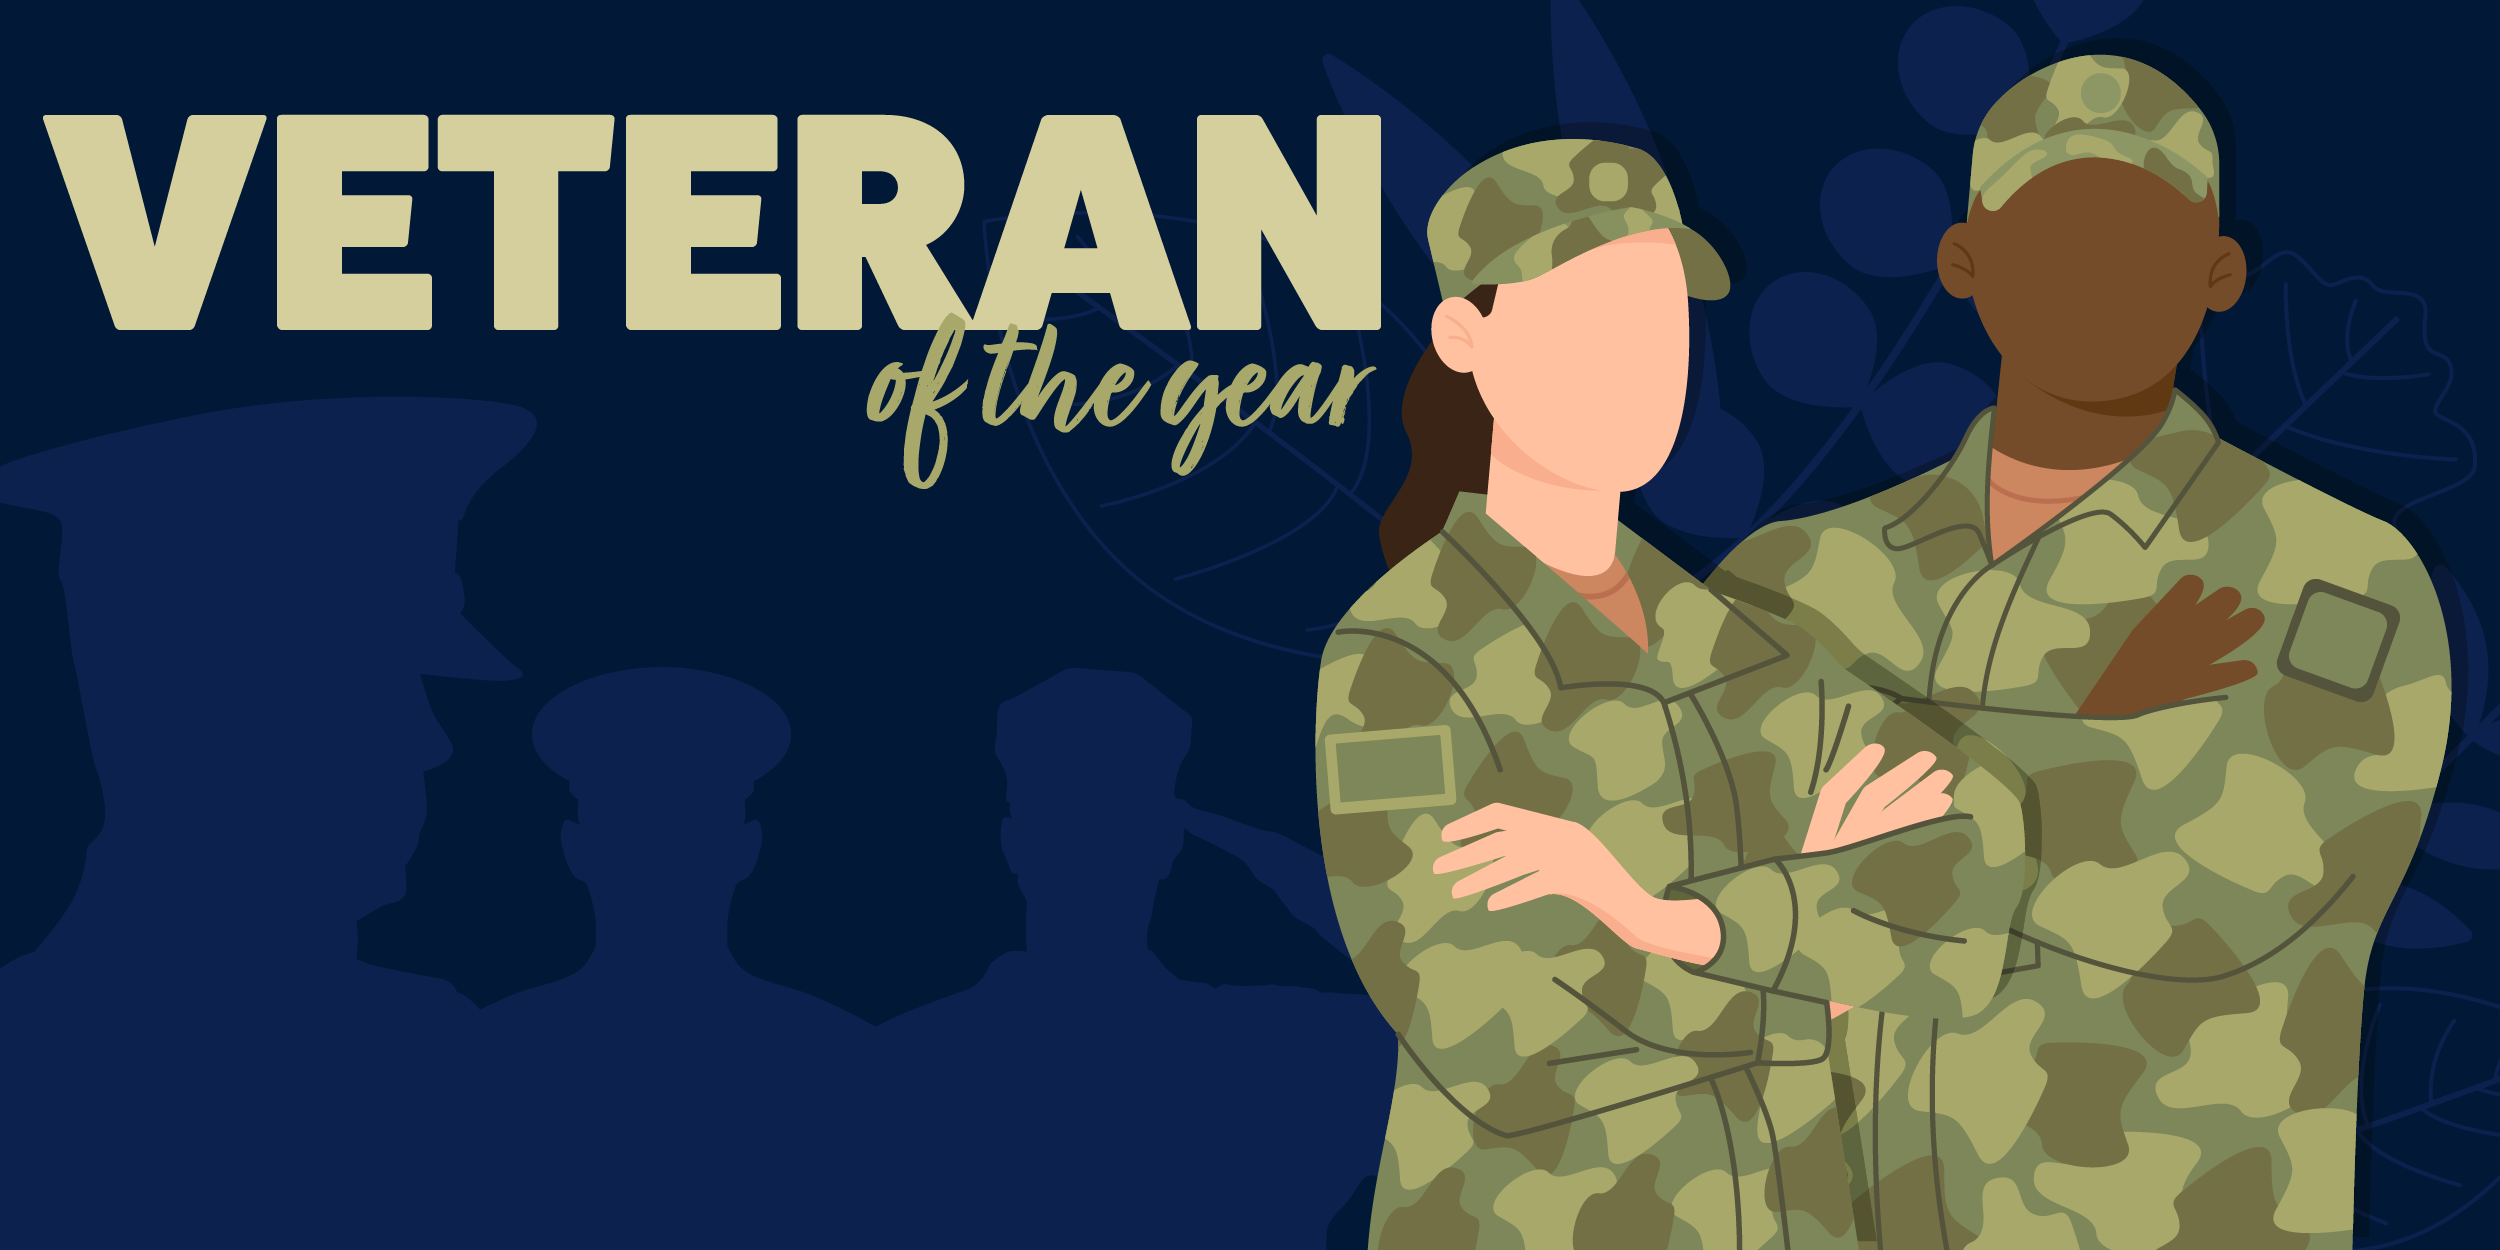 Veteran of the Year - illustration of soldiers